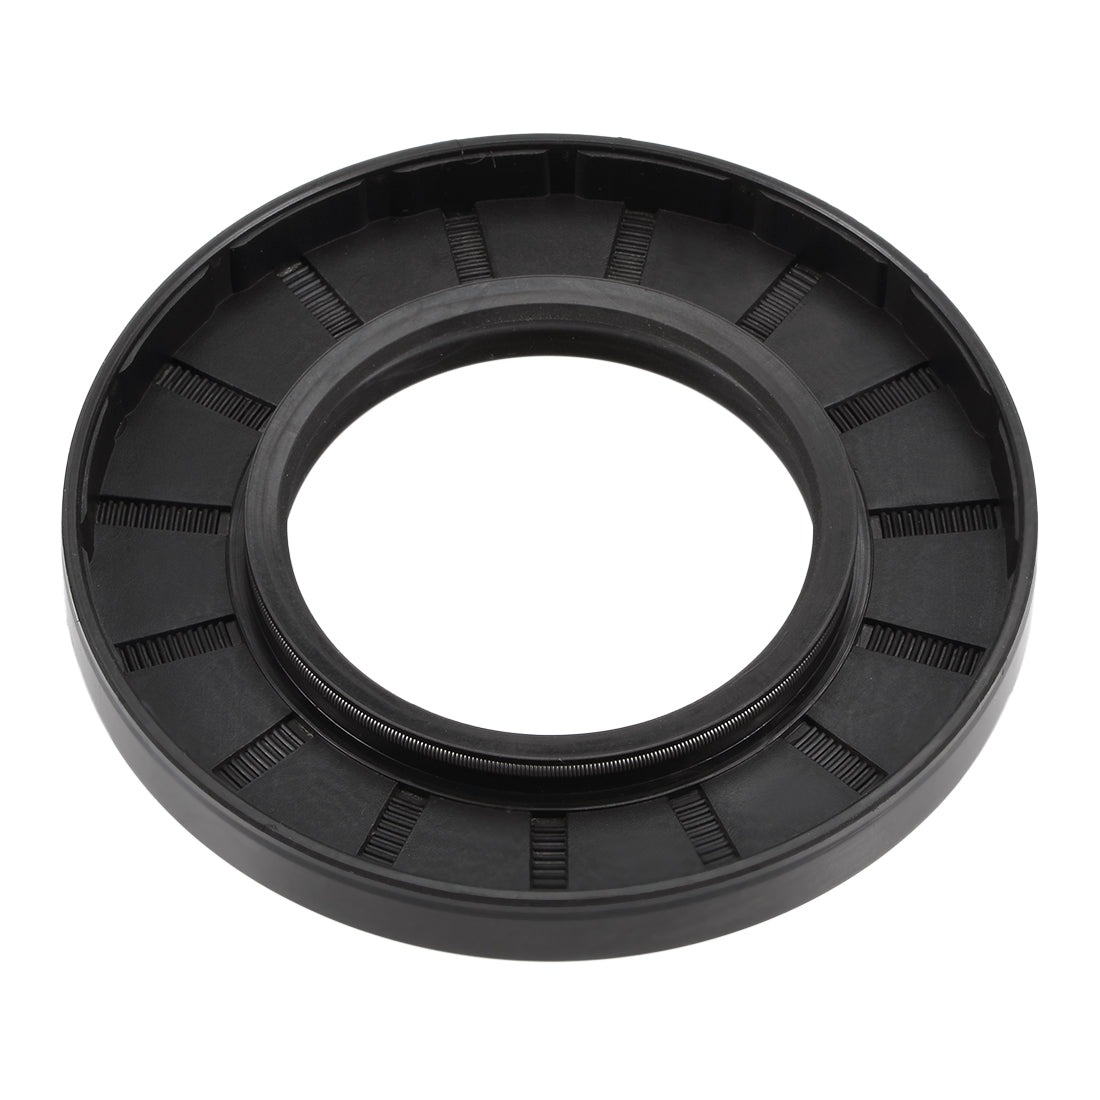 uxcell Uxcell Oil Seal, TC 50mm x 90mm x 10mm, Nitrile Rubber Cover Double Lip